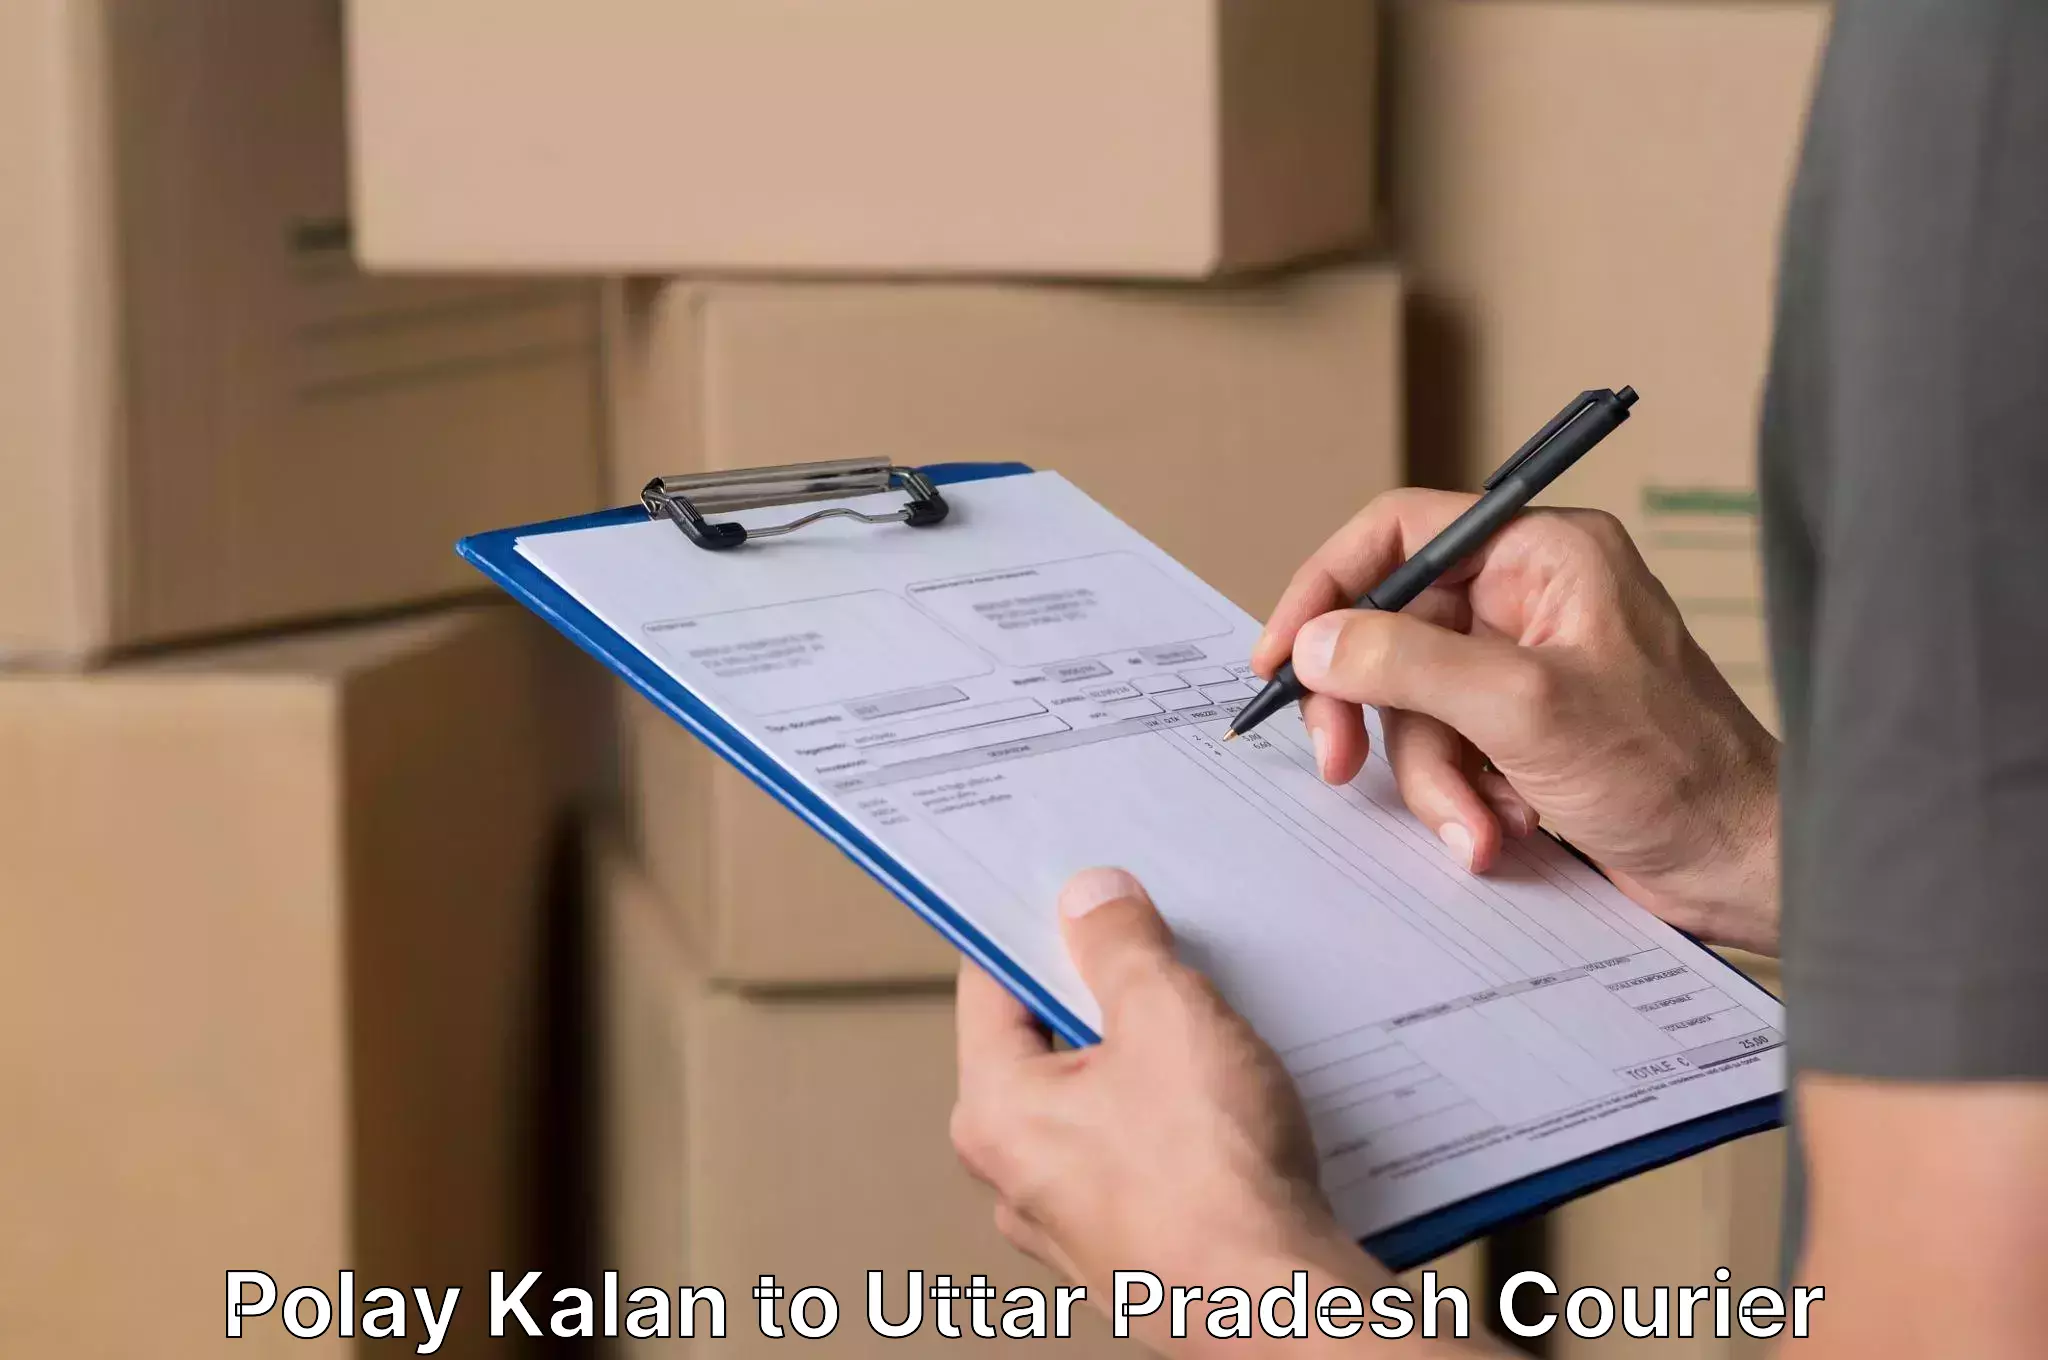 Quality relocation assistance Polay Kalan to Fatehpur